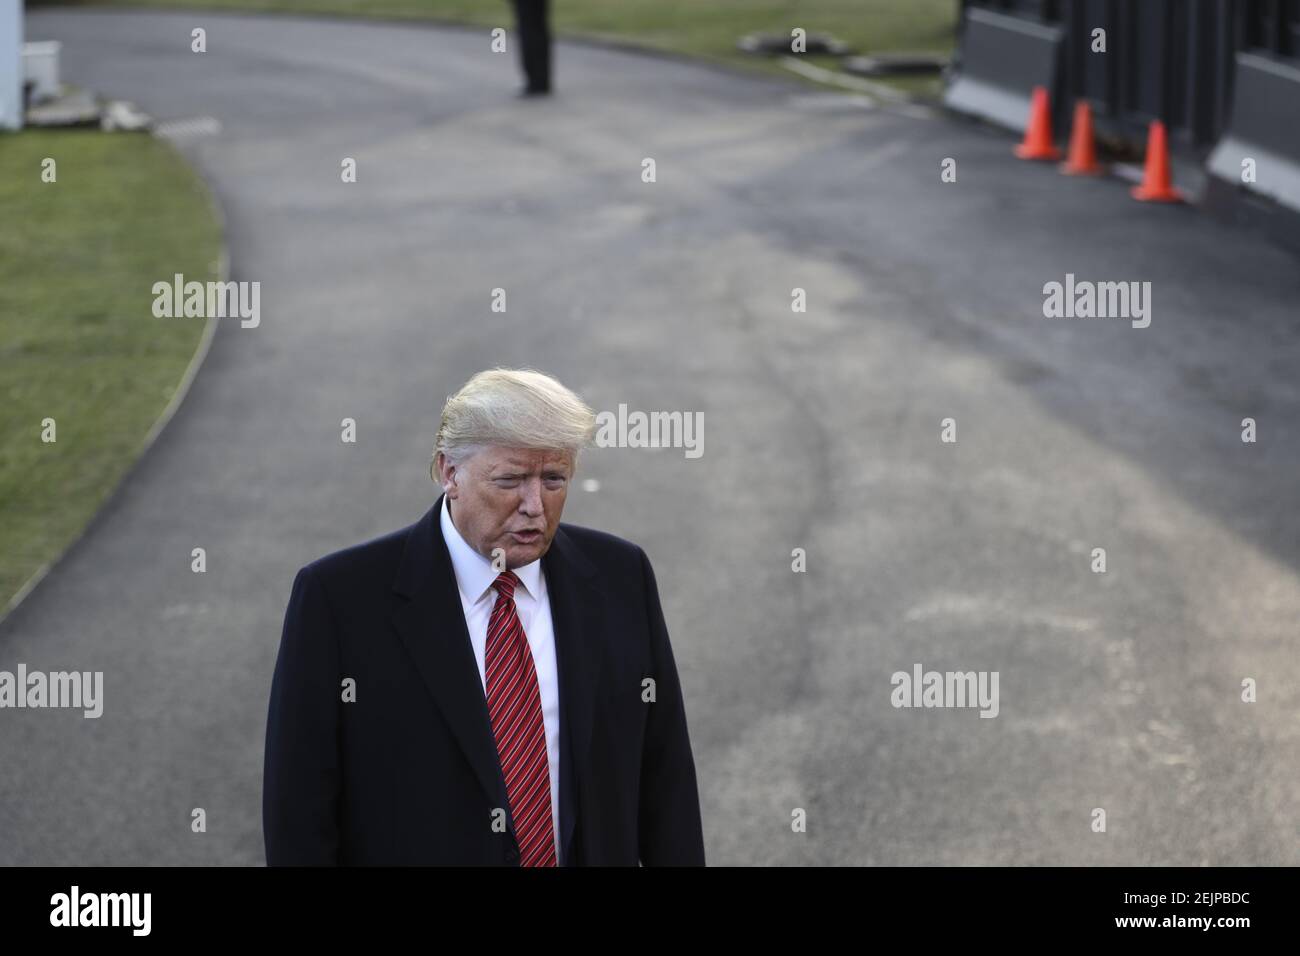 President Donald Trump speaks to the media prior to his departure from the South Lawn of the White House in Washington, DC, on February 28, 2020. - Trump is traveling to North Charleston, South Carolina for a MAGA rally. (Photo by Oliver Contreras/SIPA USA)  Stock Photo